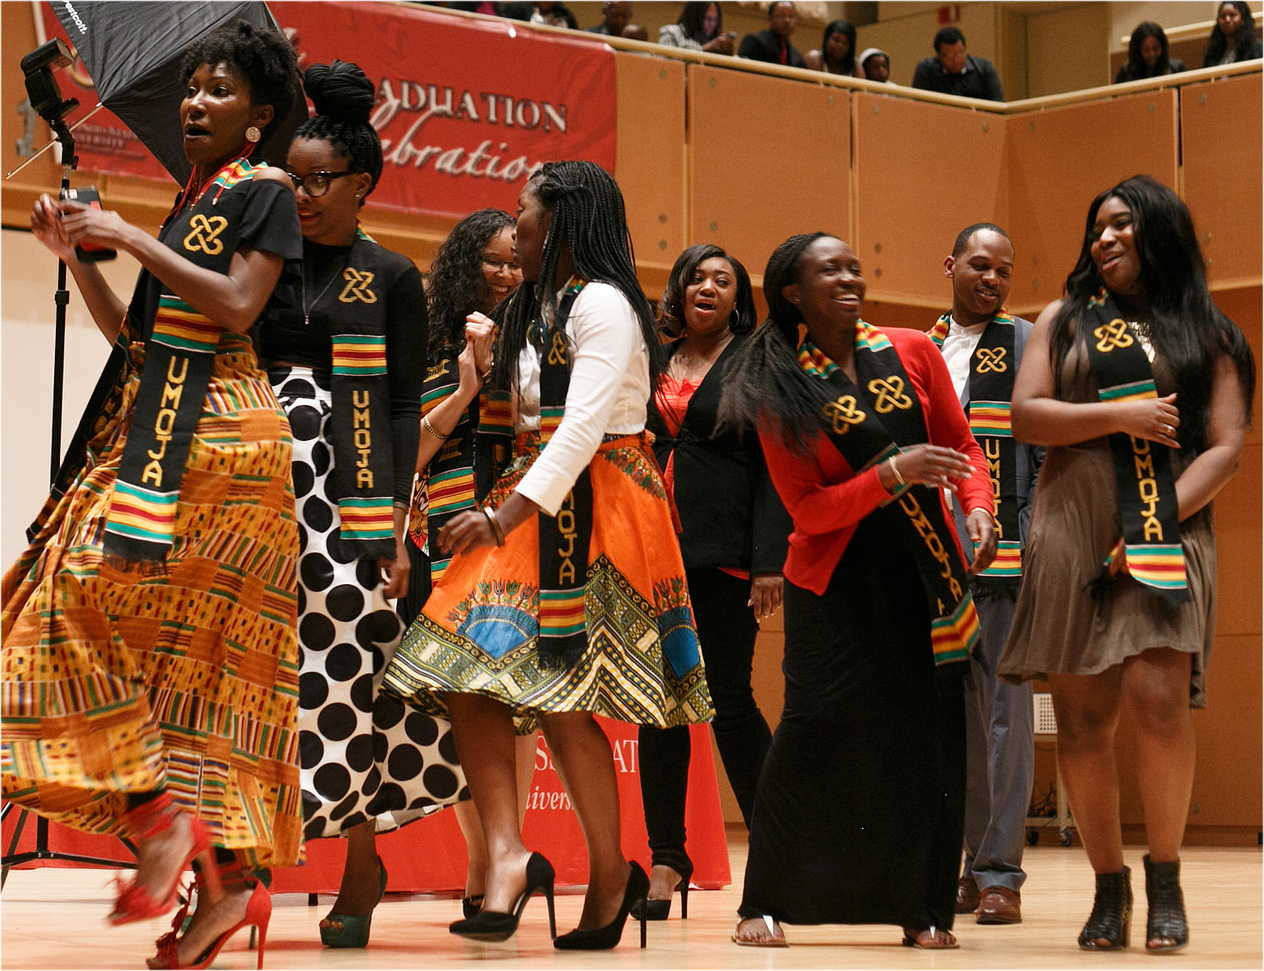 graduates dancing on stage as part of the Umoja celebration